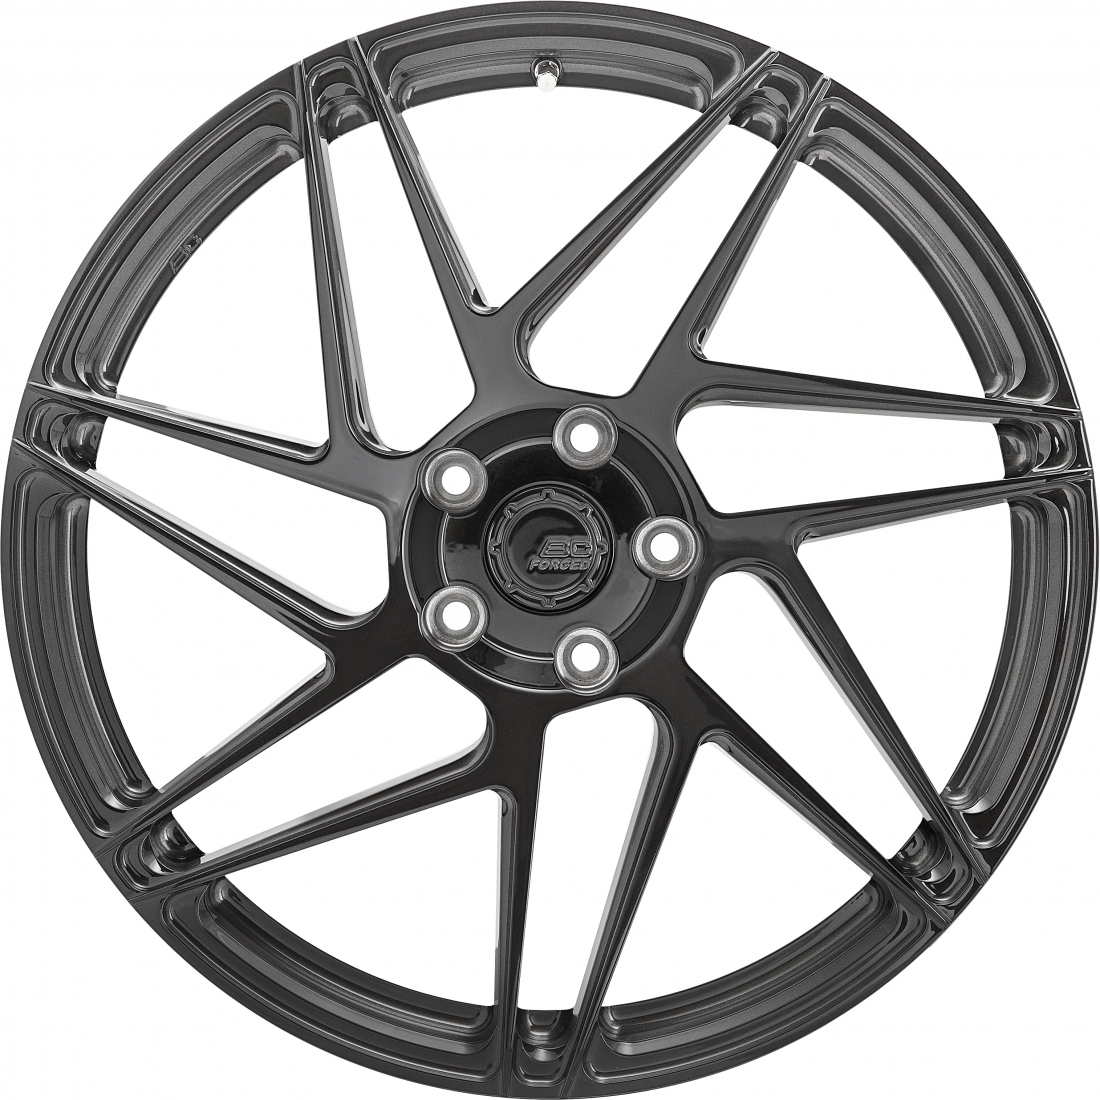 2020-23 BC Forged EH177 Wheels for C8 Corvette, Set of 4